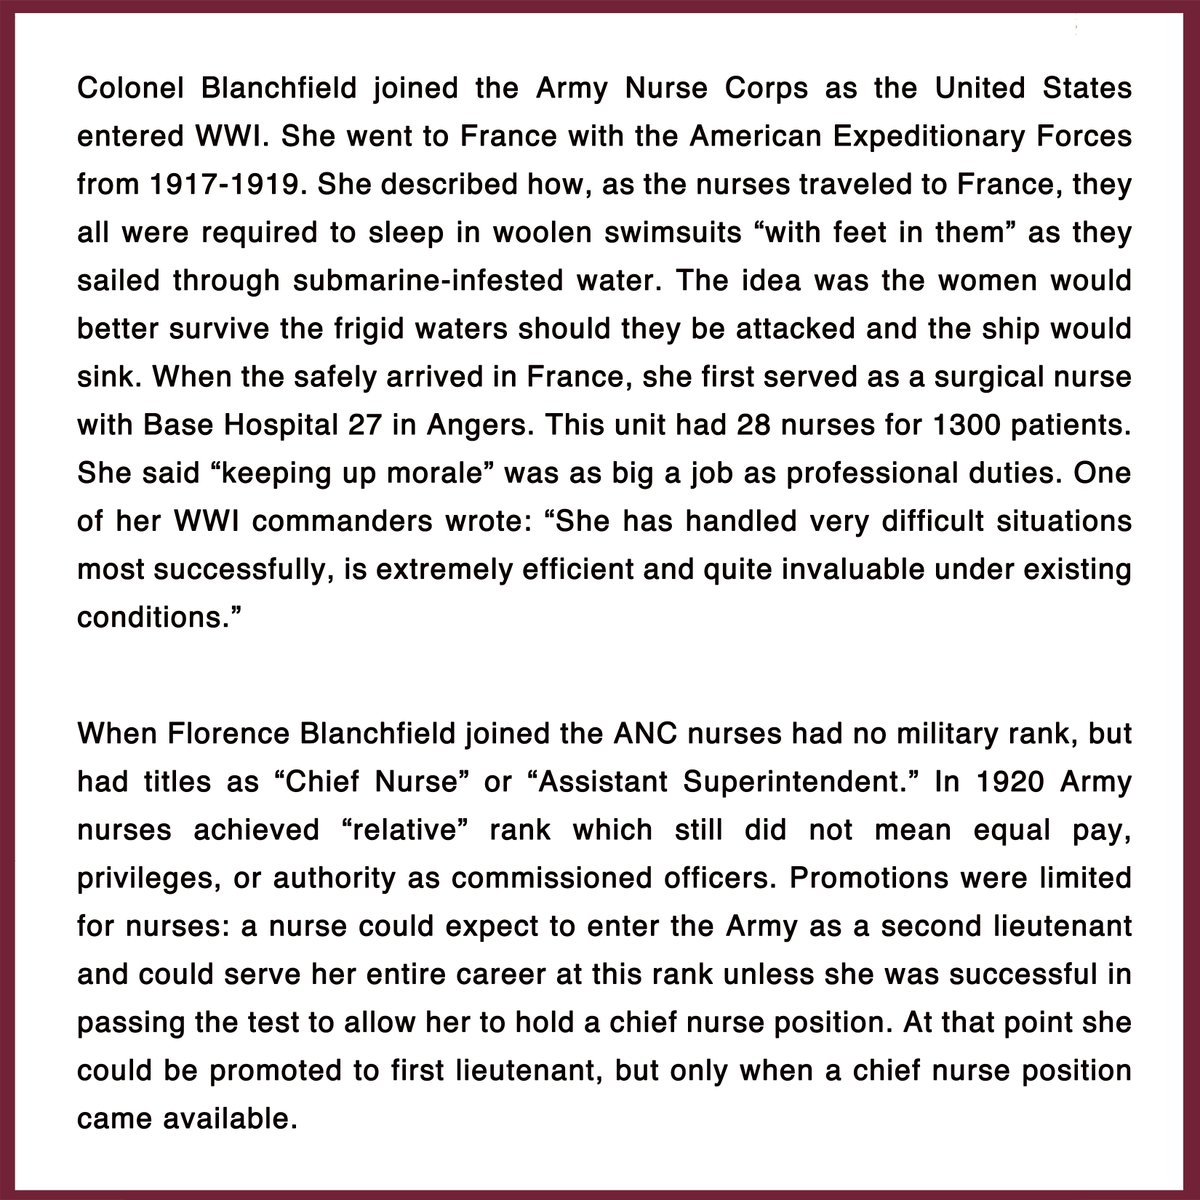 19 JUN1947: Col. Florence Blanchfield, superintendent of Army Nurses, is shown in 1947 with Gen. Eisenhower as she became the first woman to receive a regular Army commission. OOL Florence Blanchfield, 1884-1971 history.amedd.army.mil/newsletters/AM… @ArmyNurseCorps @MedicalCoE @TRADOC